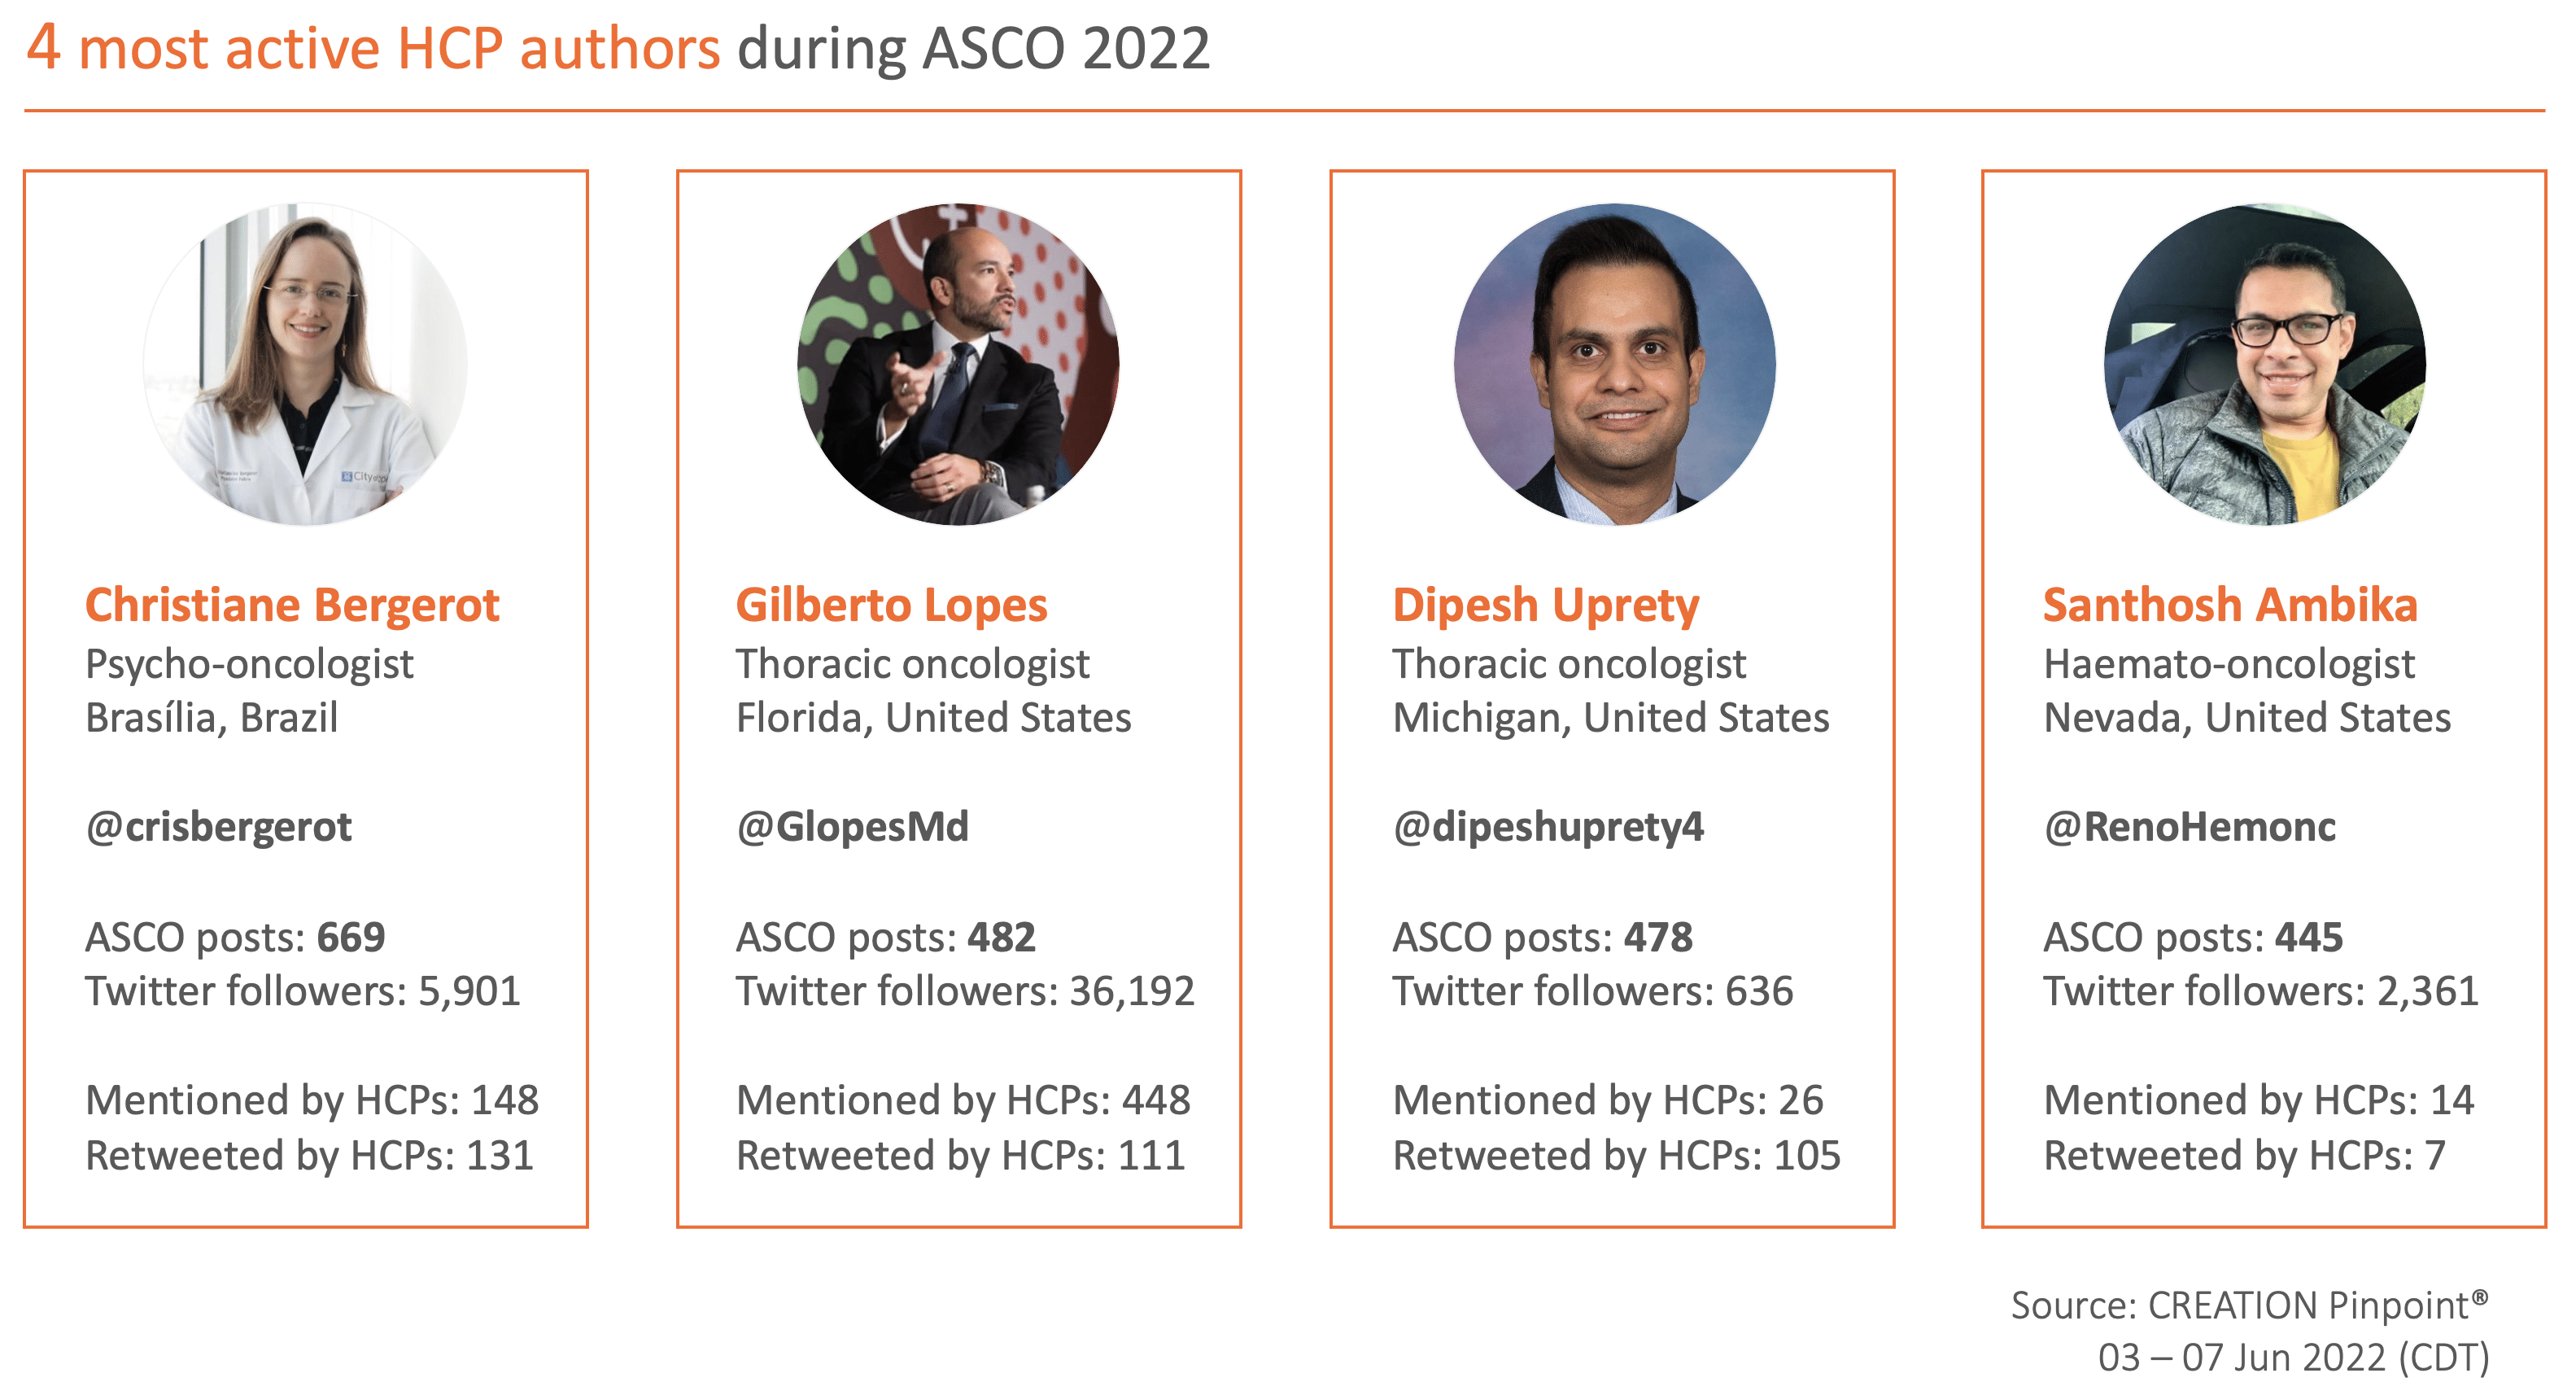 A Chart showing the most active HCP authors during ASCO 2022